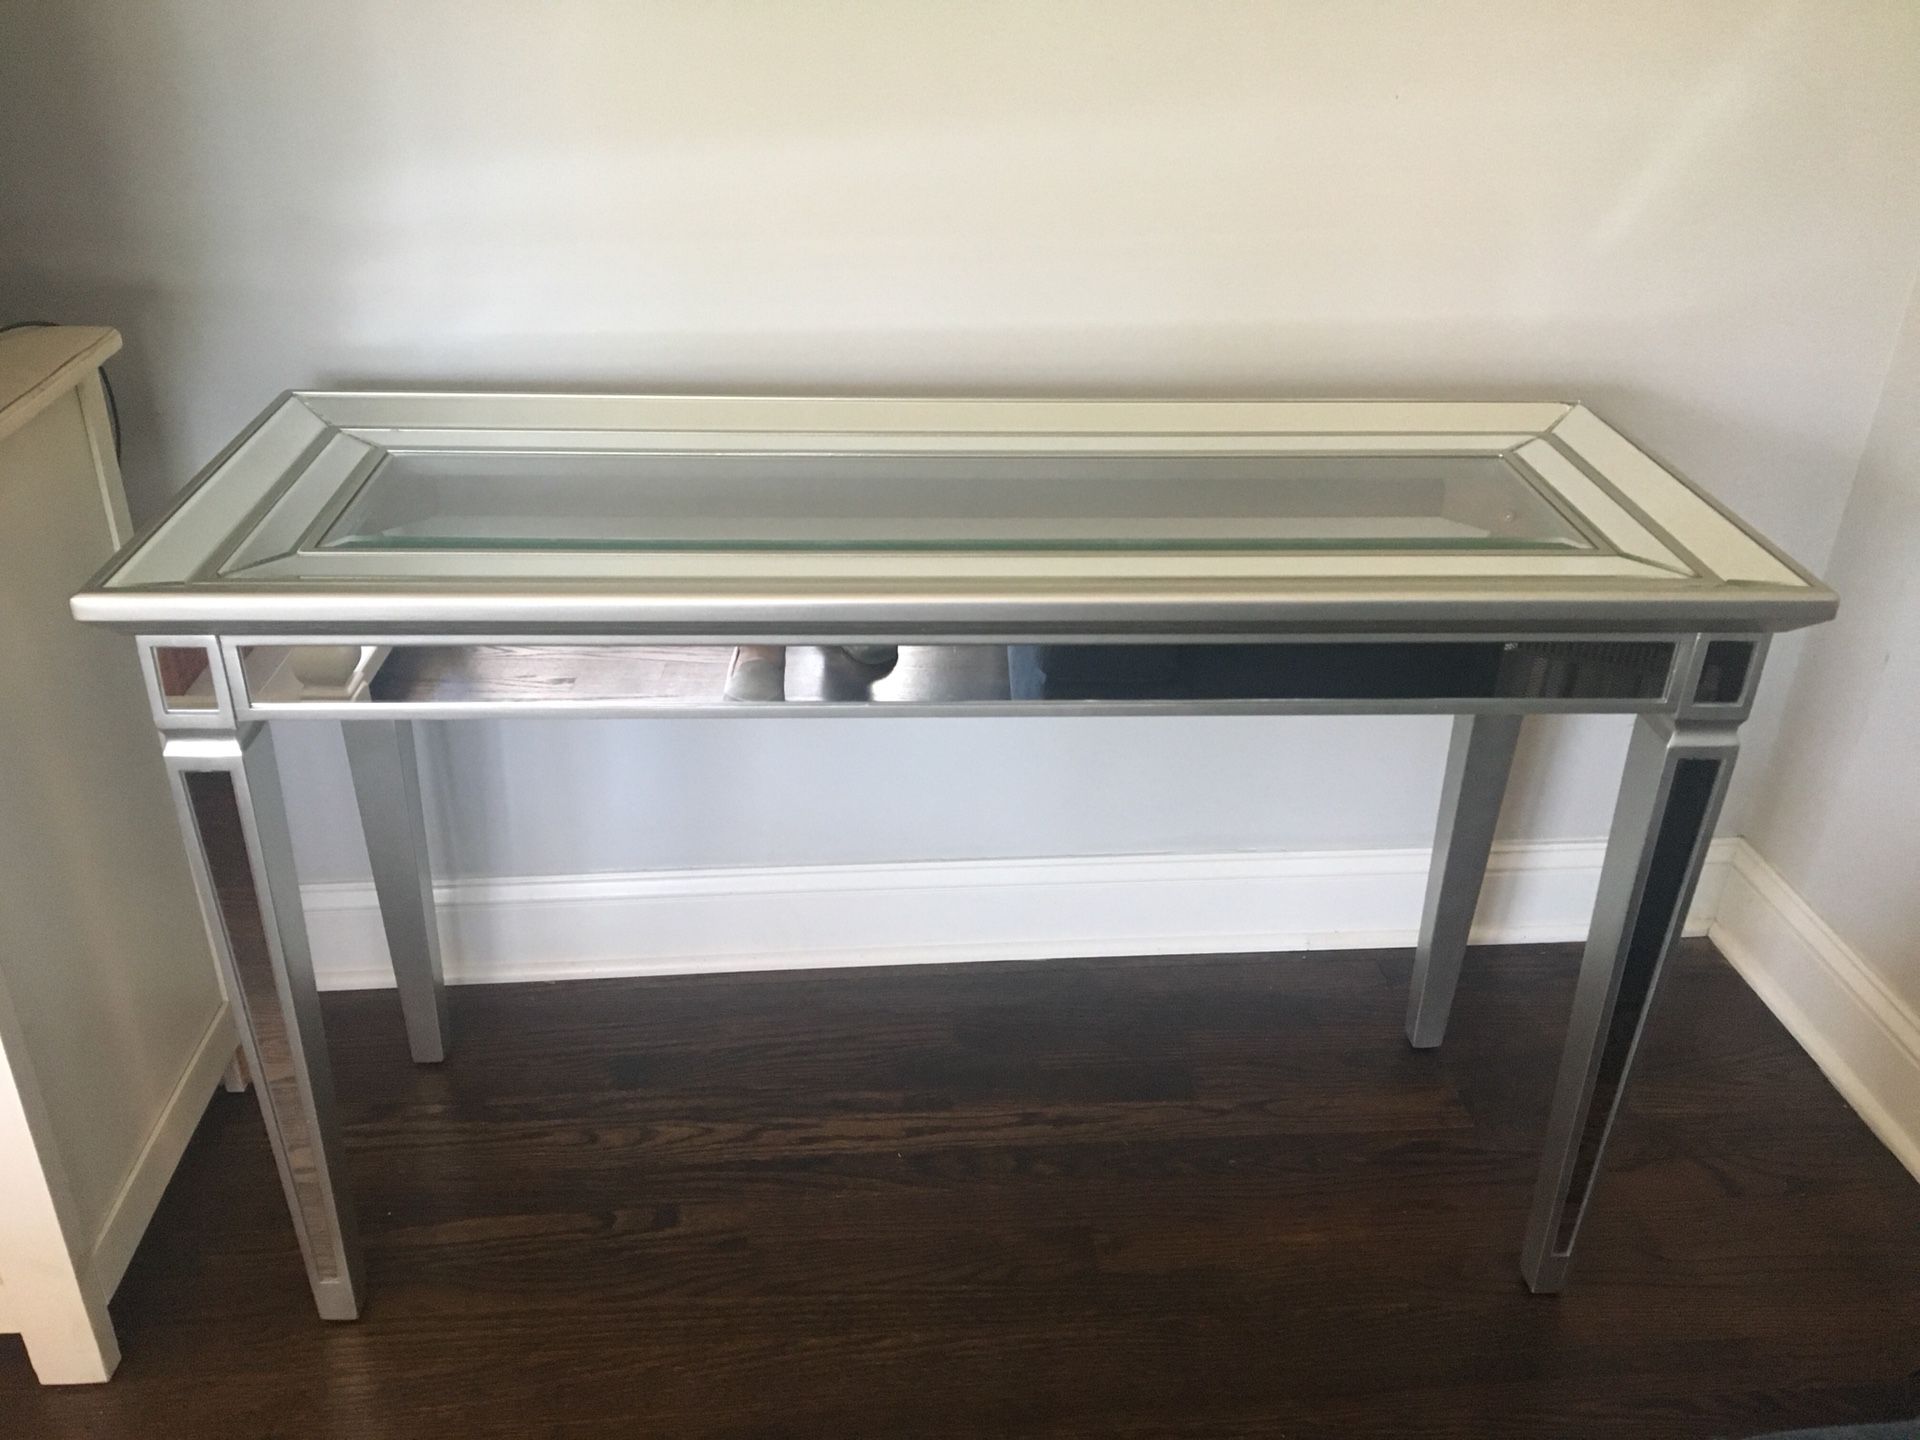 Beveled glass table